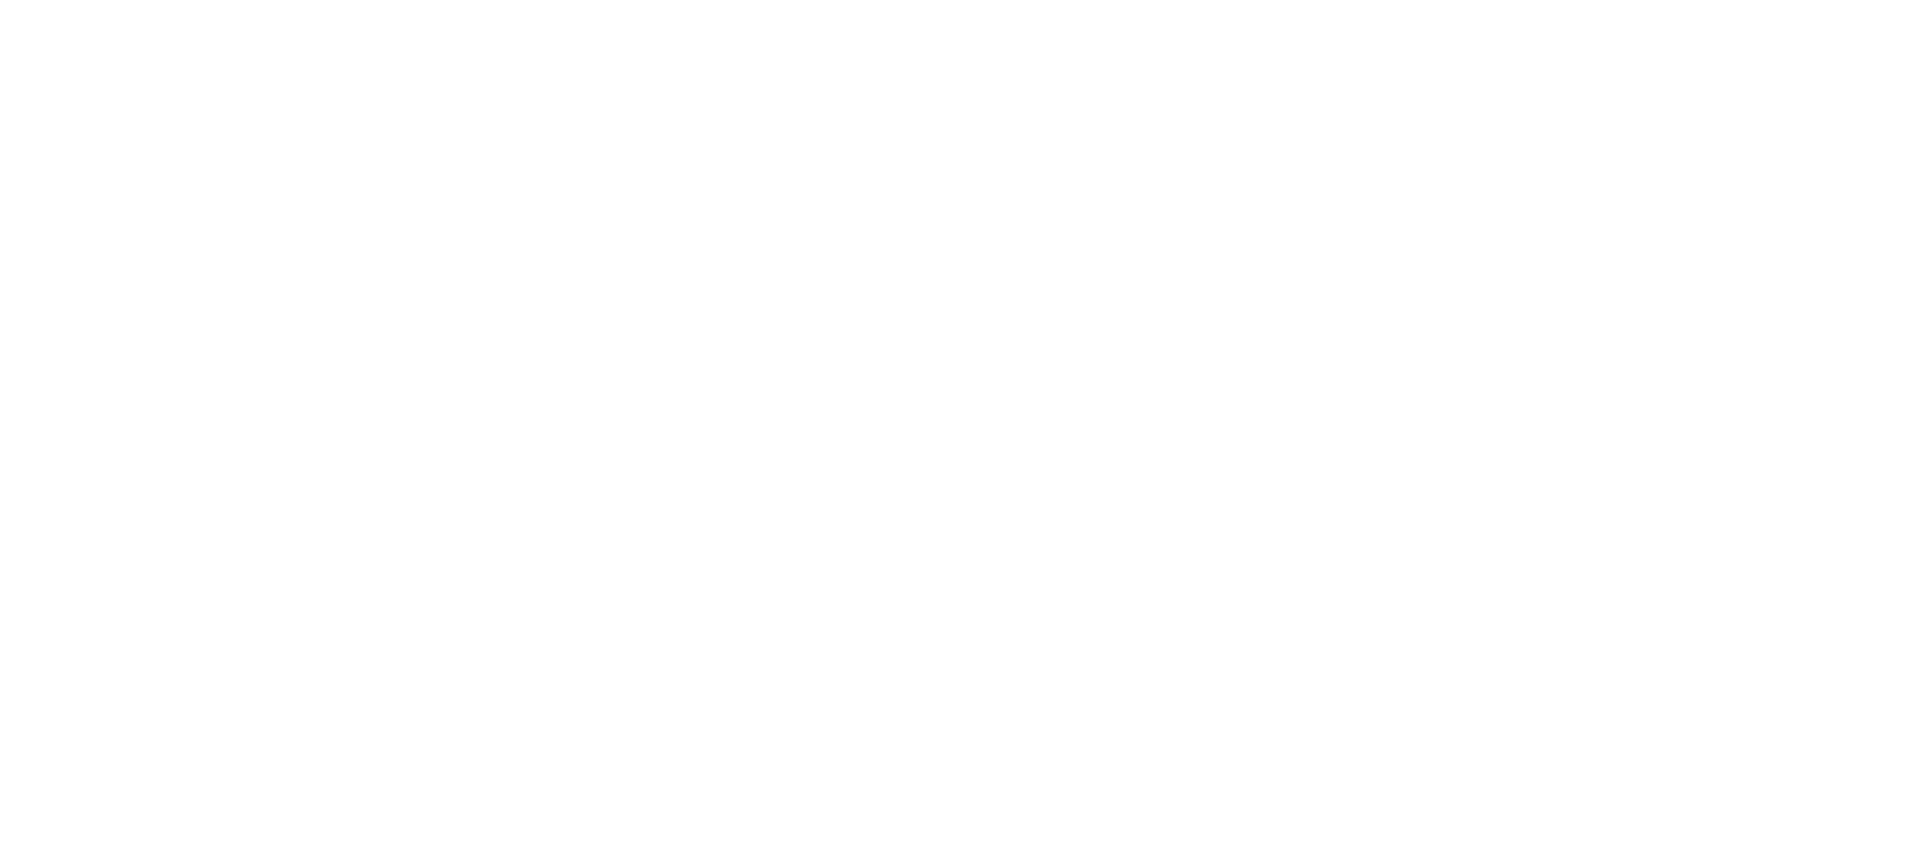 We think local